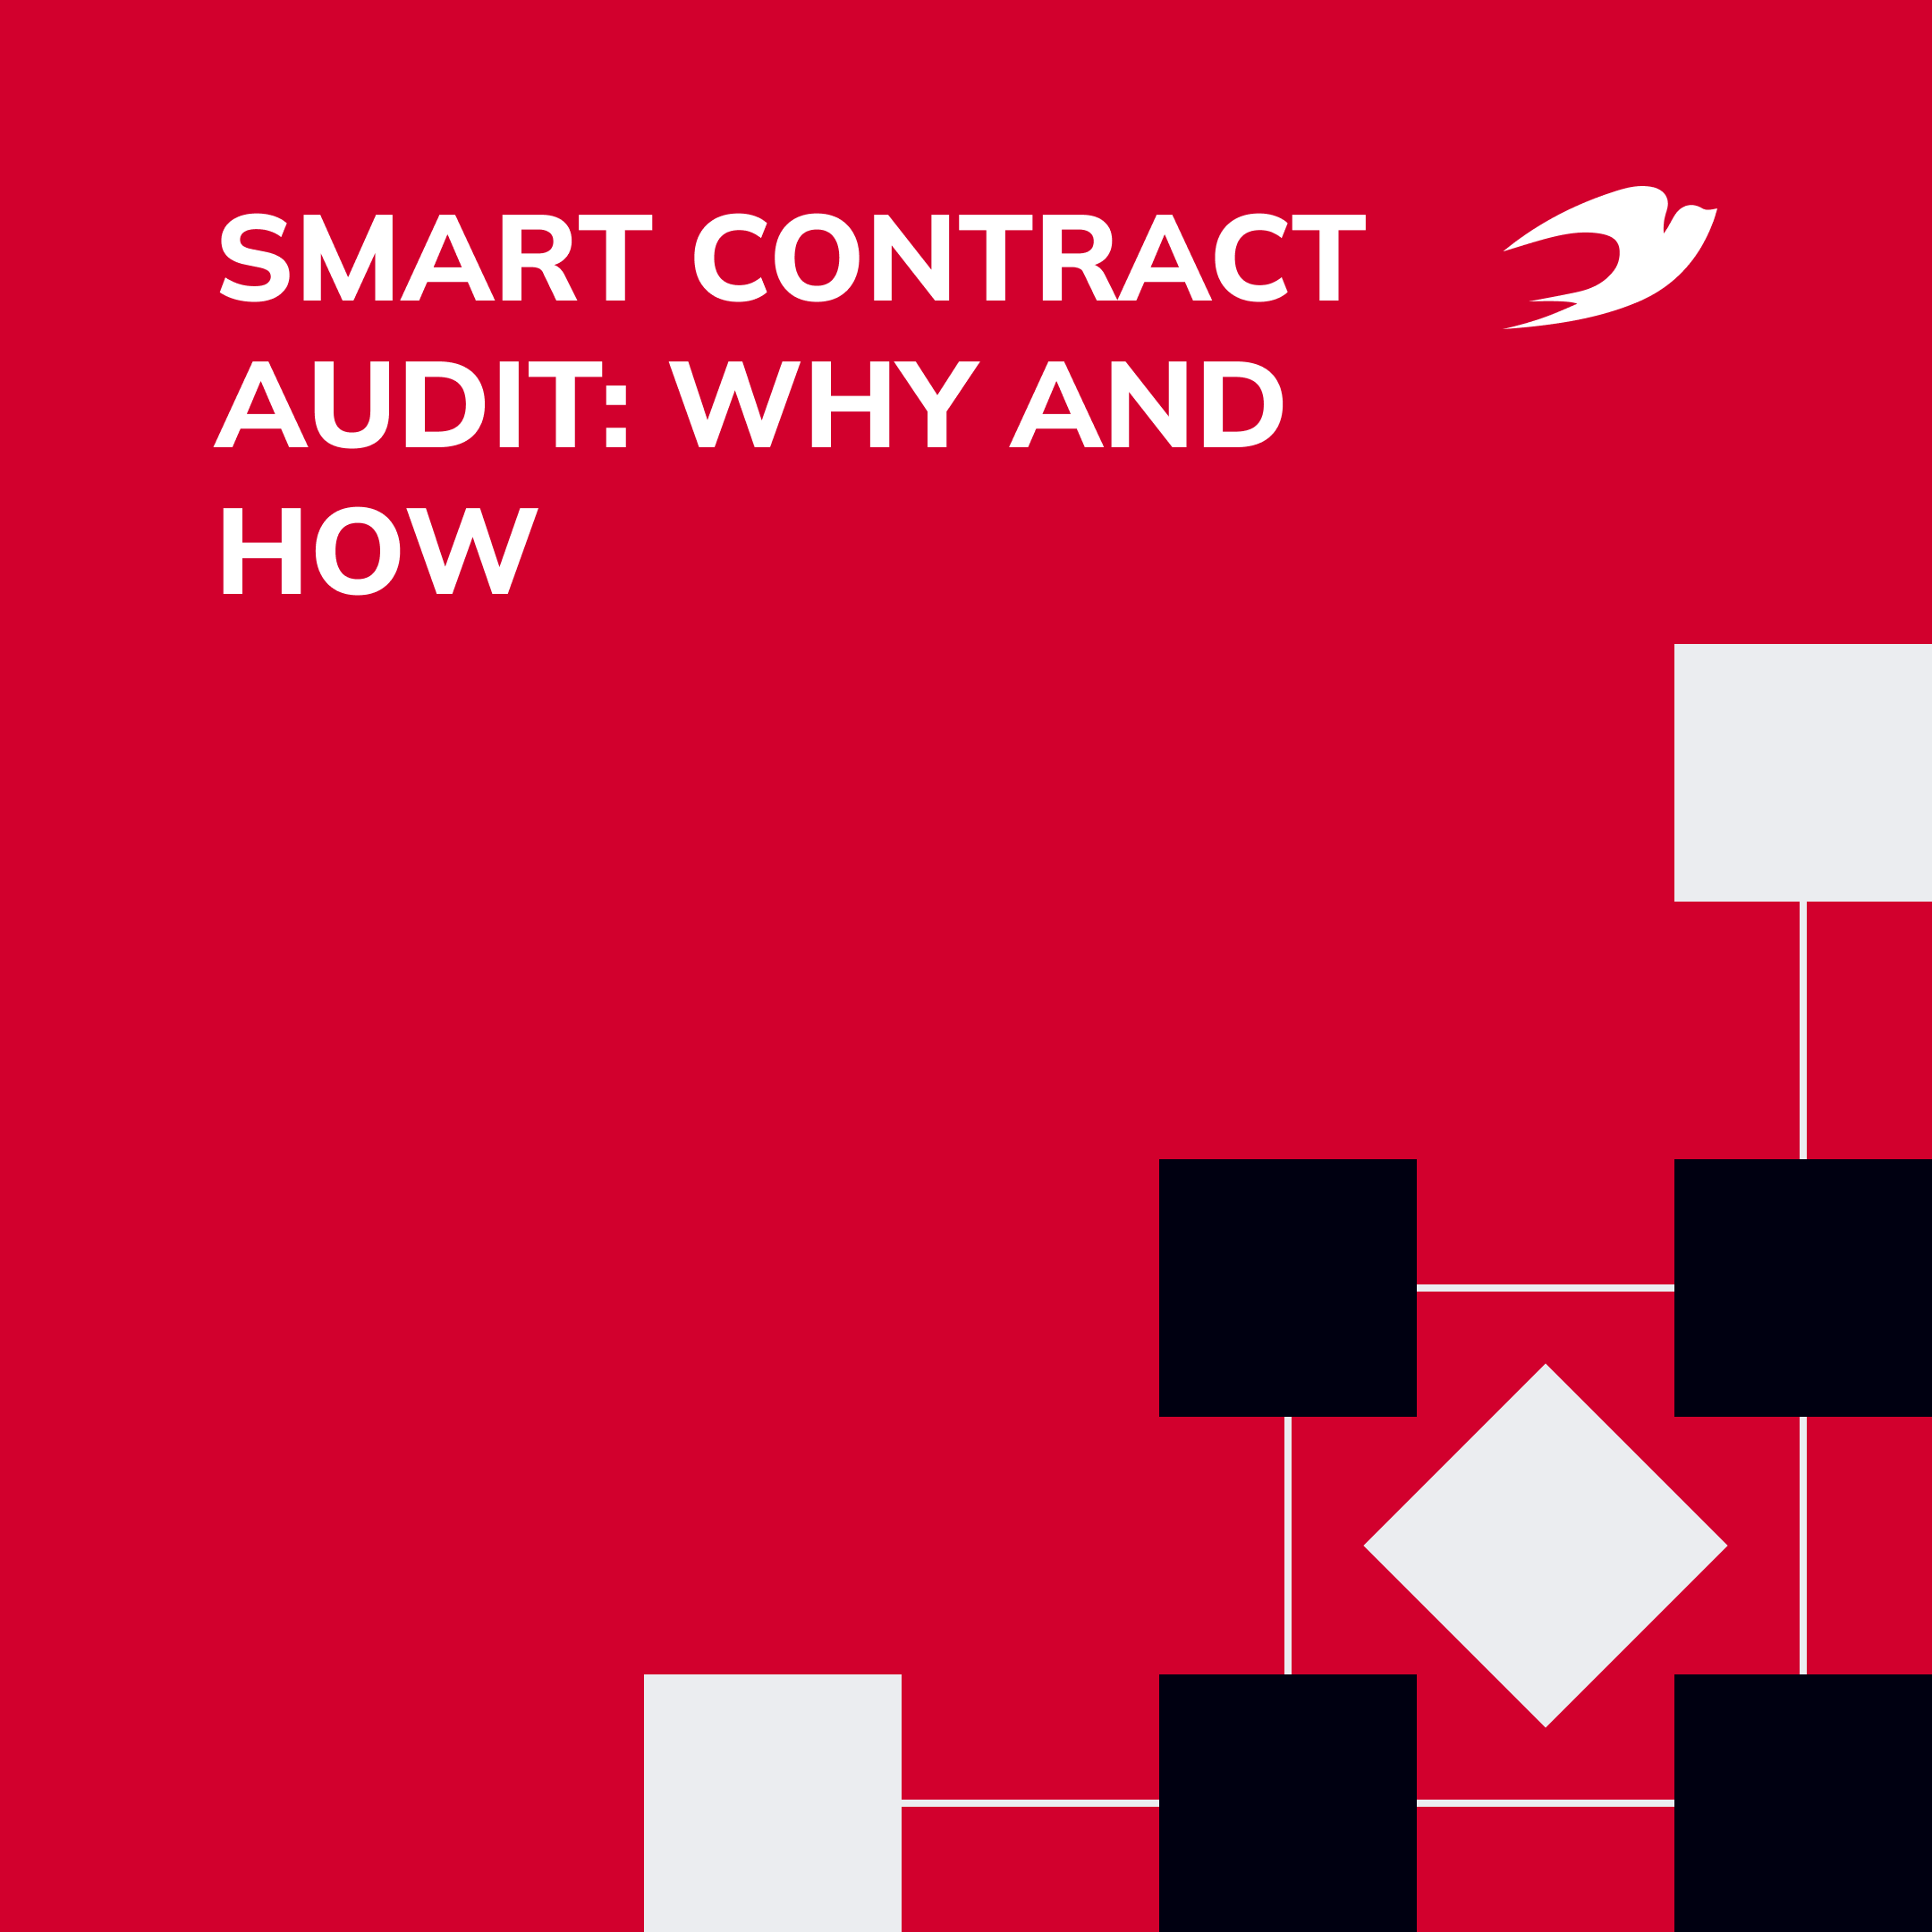 Smart Contract Audit: Why and How